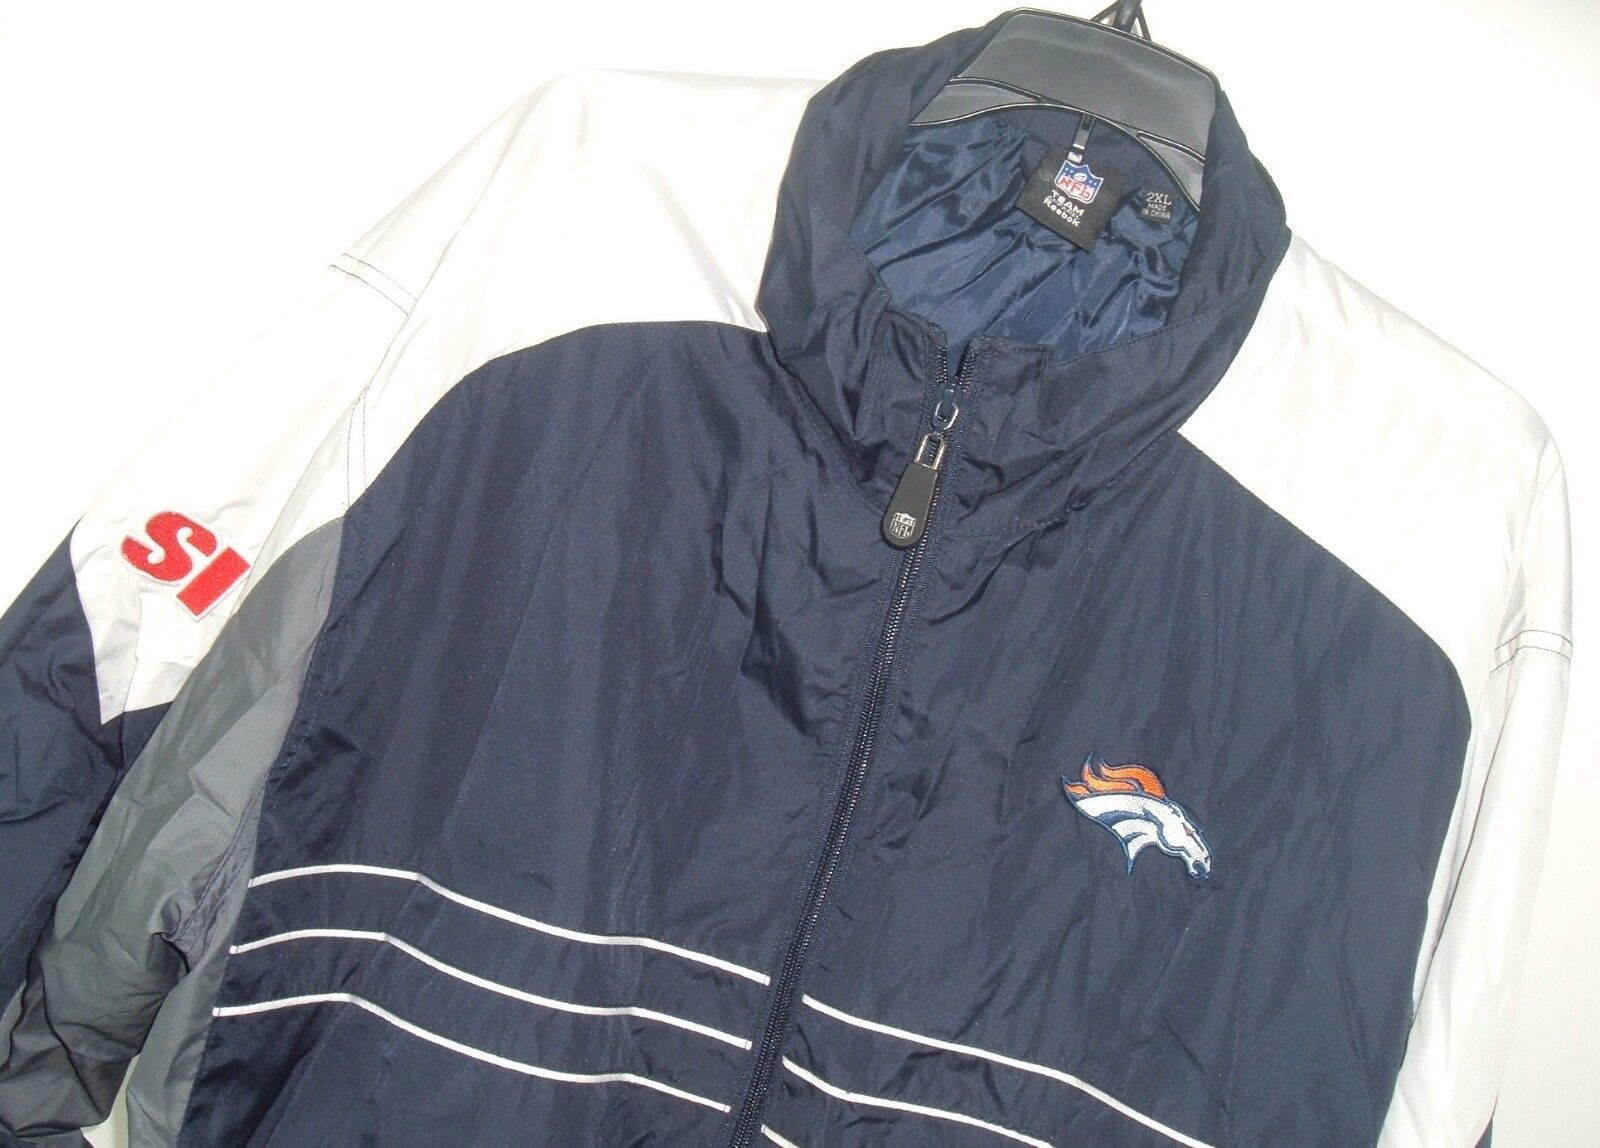 Primary image for Jacket NFL Team Apparel Reebok Broncos Size 2XL Sports Illustrated